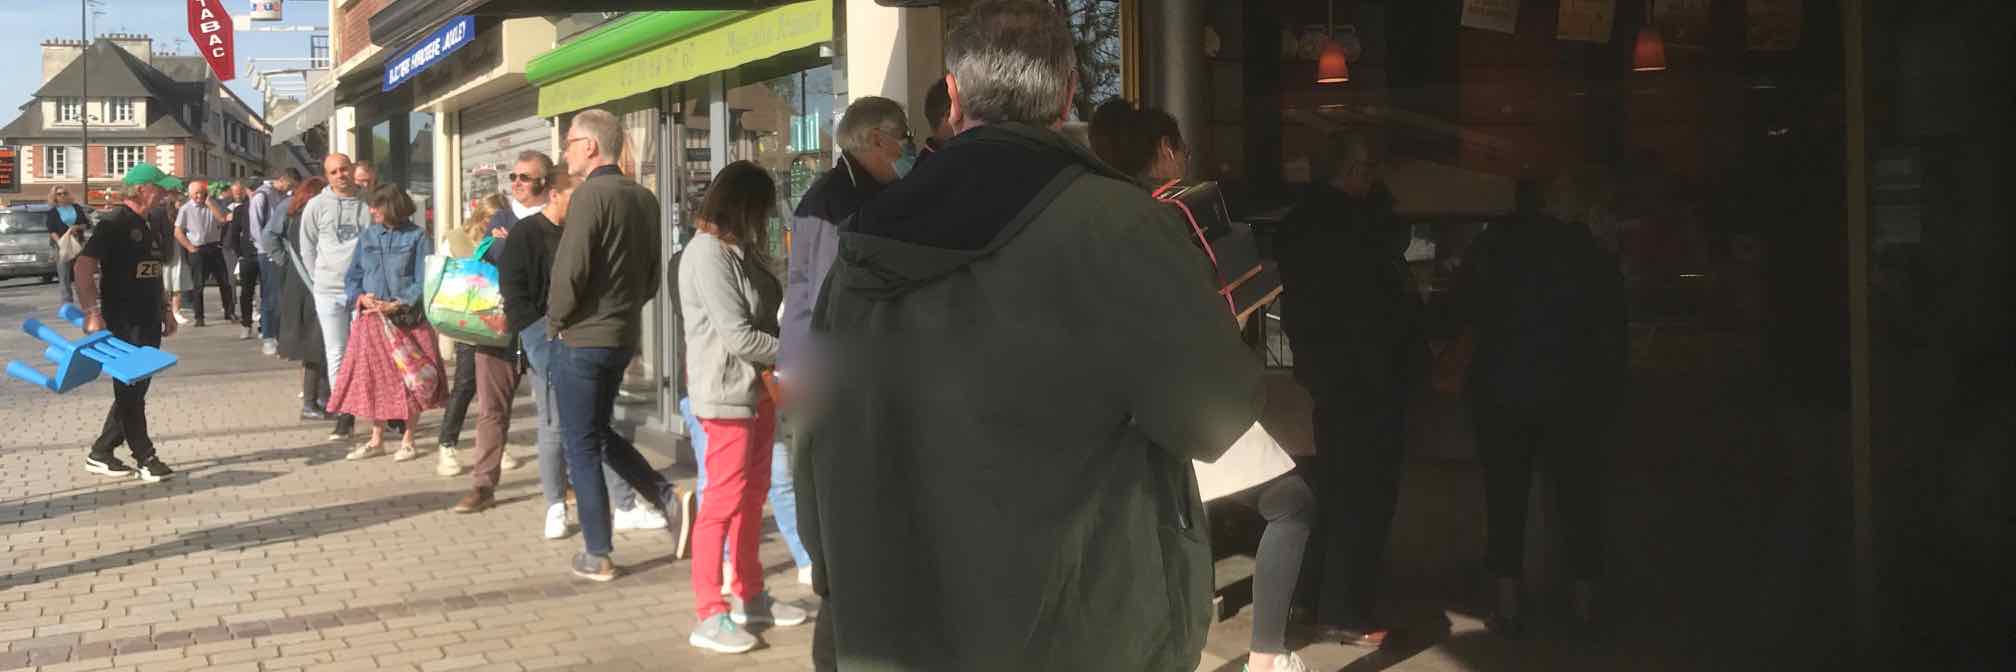 customers lined up outside French pastry shop on Easter morning